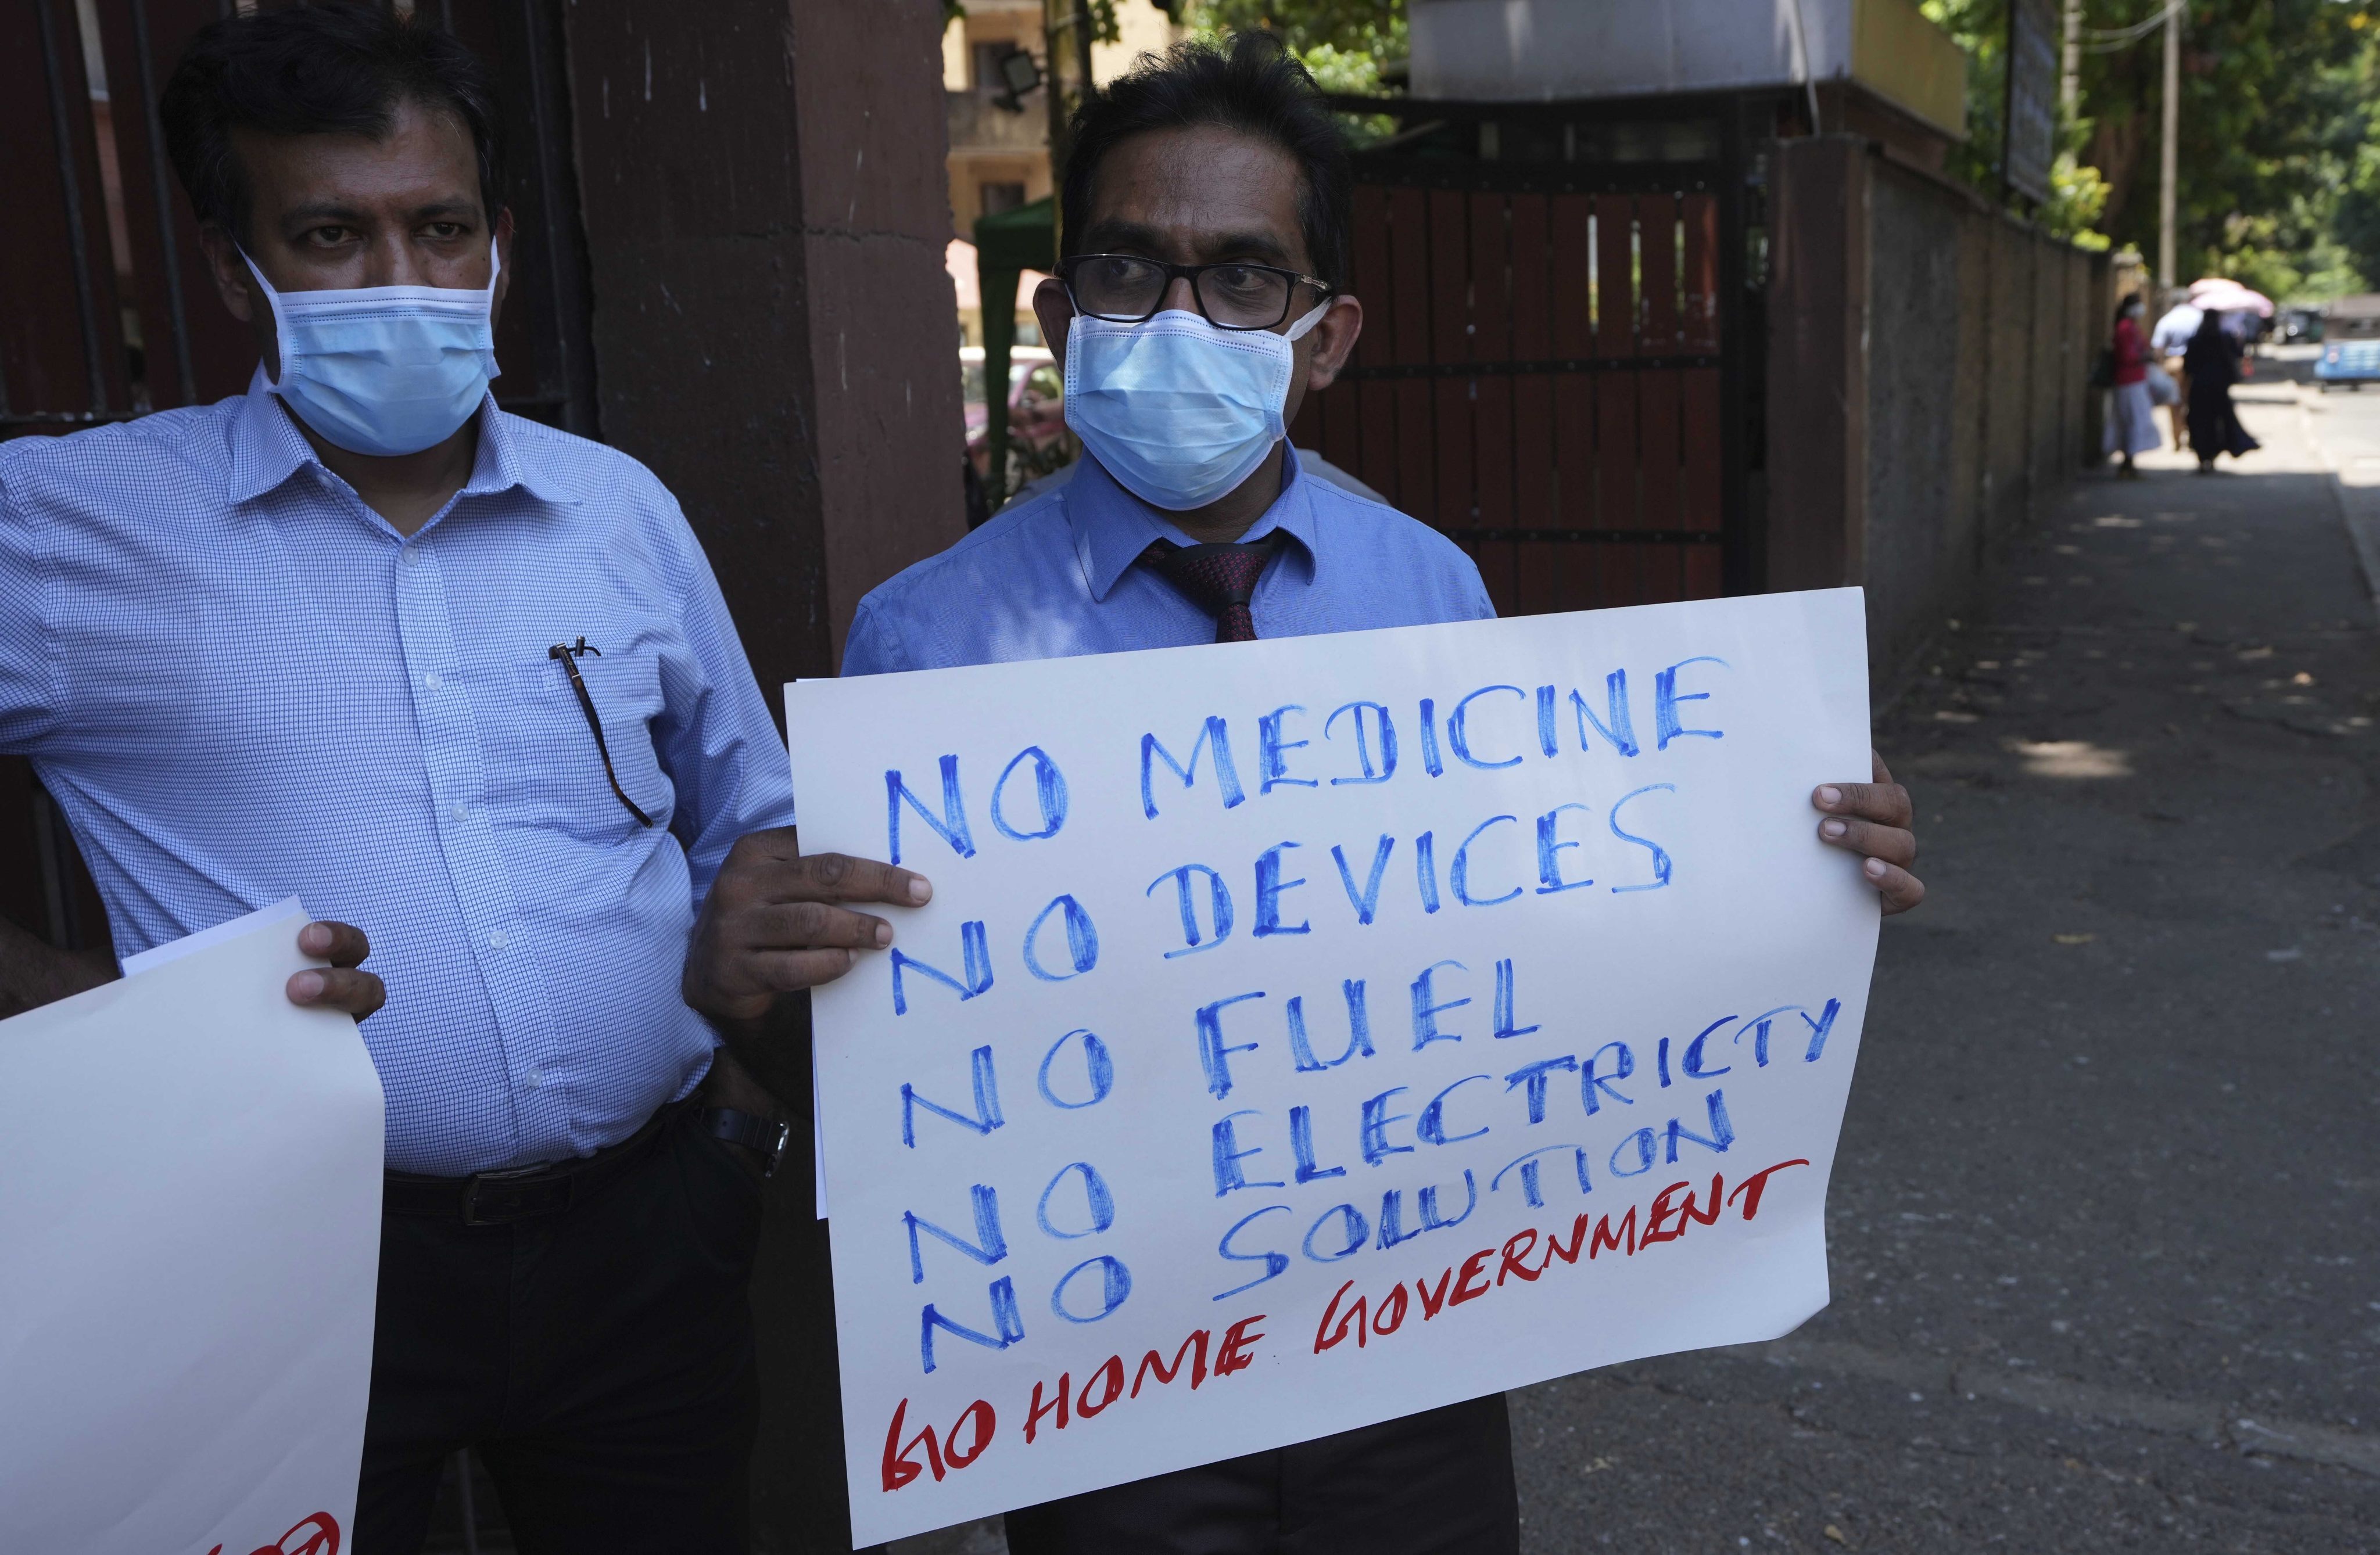 Sri Lankan government medical officers protest outside a hospital in Colombo. Professional medical organisations are warning that people will die as emergency treatment will soon not be possible if drugs and equipment are not received urgently. Photo: AP